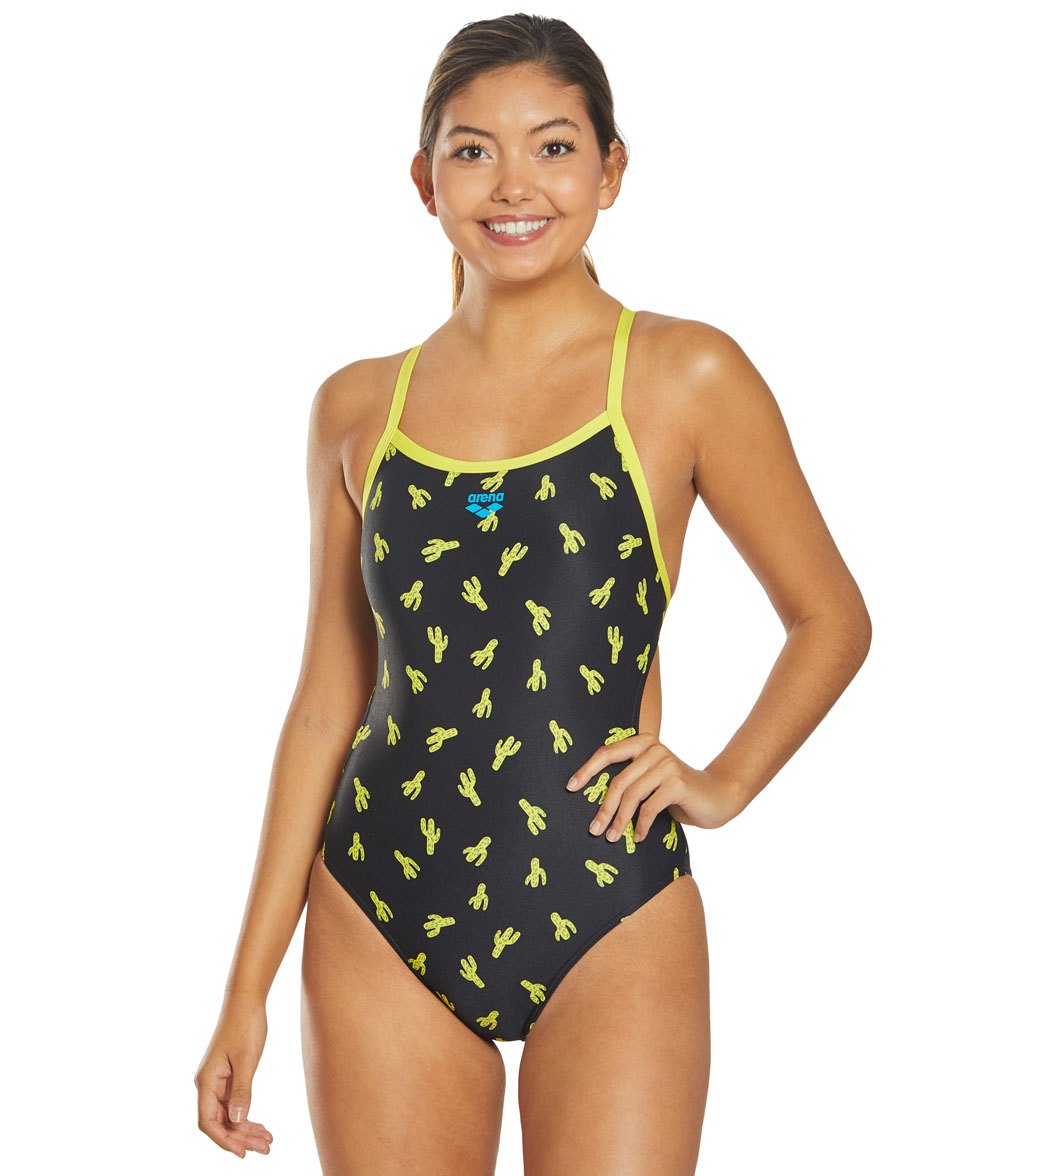 Arena Women's Cactus Challenge Back One Piece Swimsuit - Black/Yellow Star 24 Polyester - Swimoutlet.com